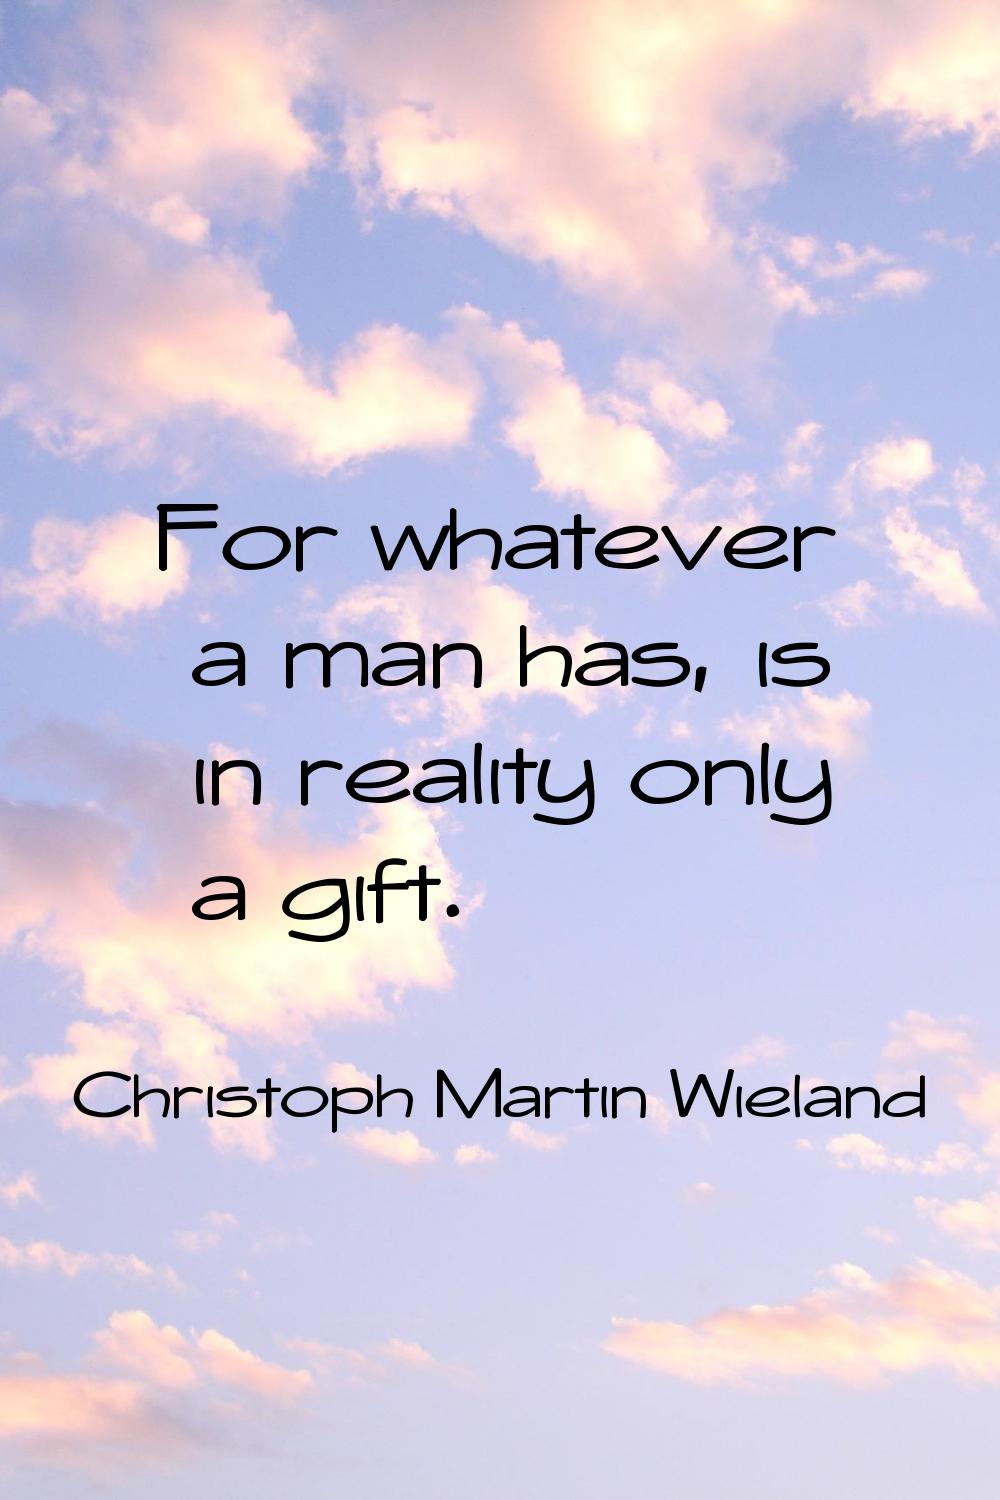 For whatever a man has, is in reality only a gift.